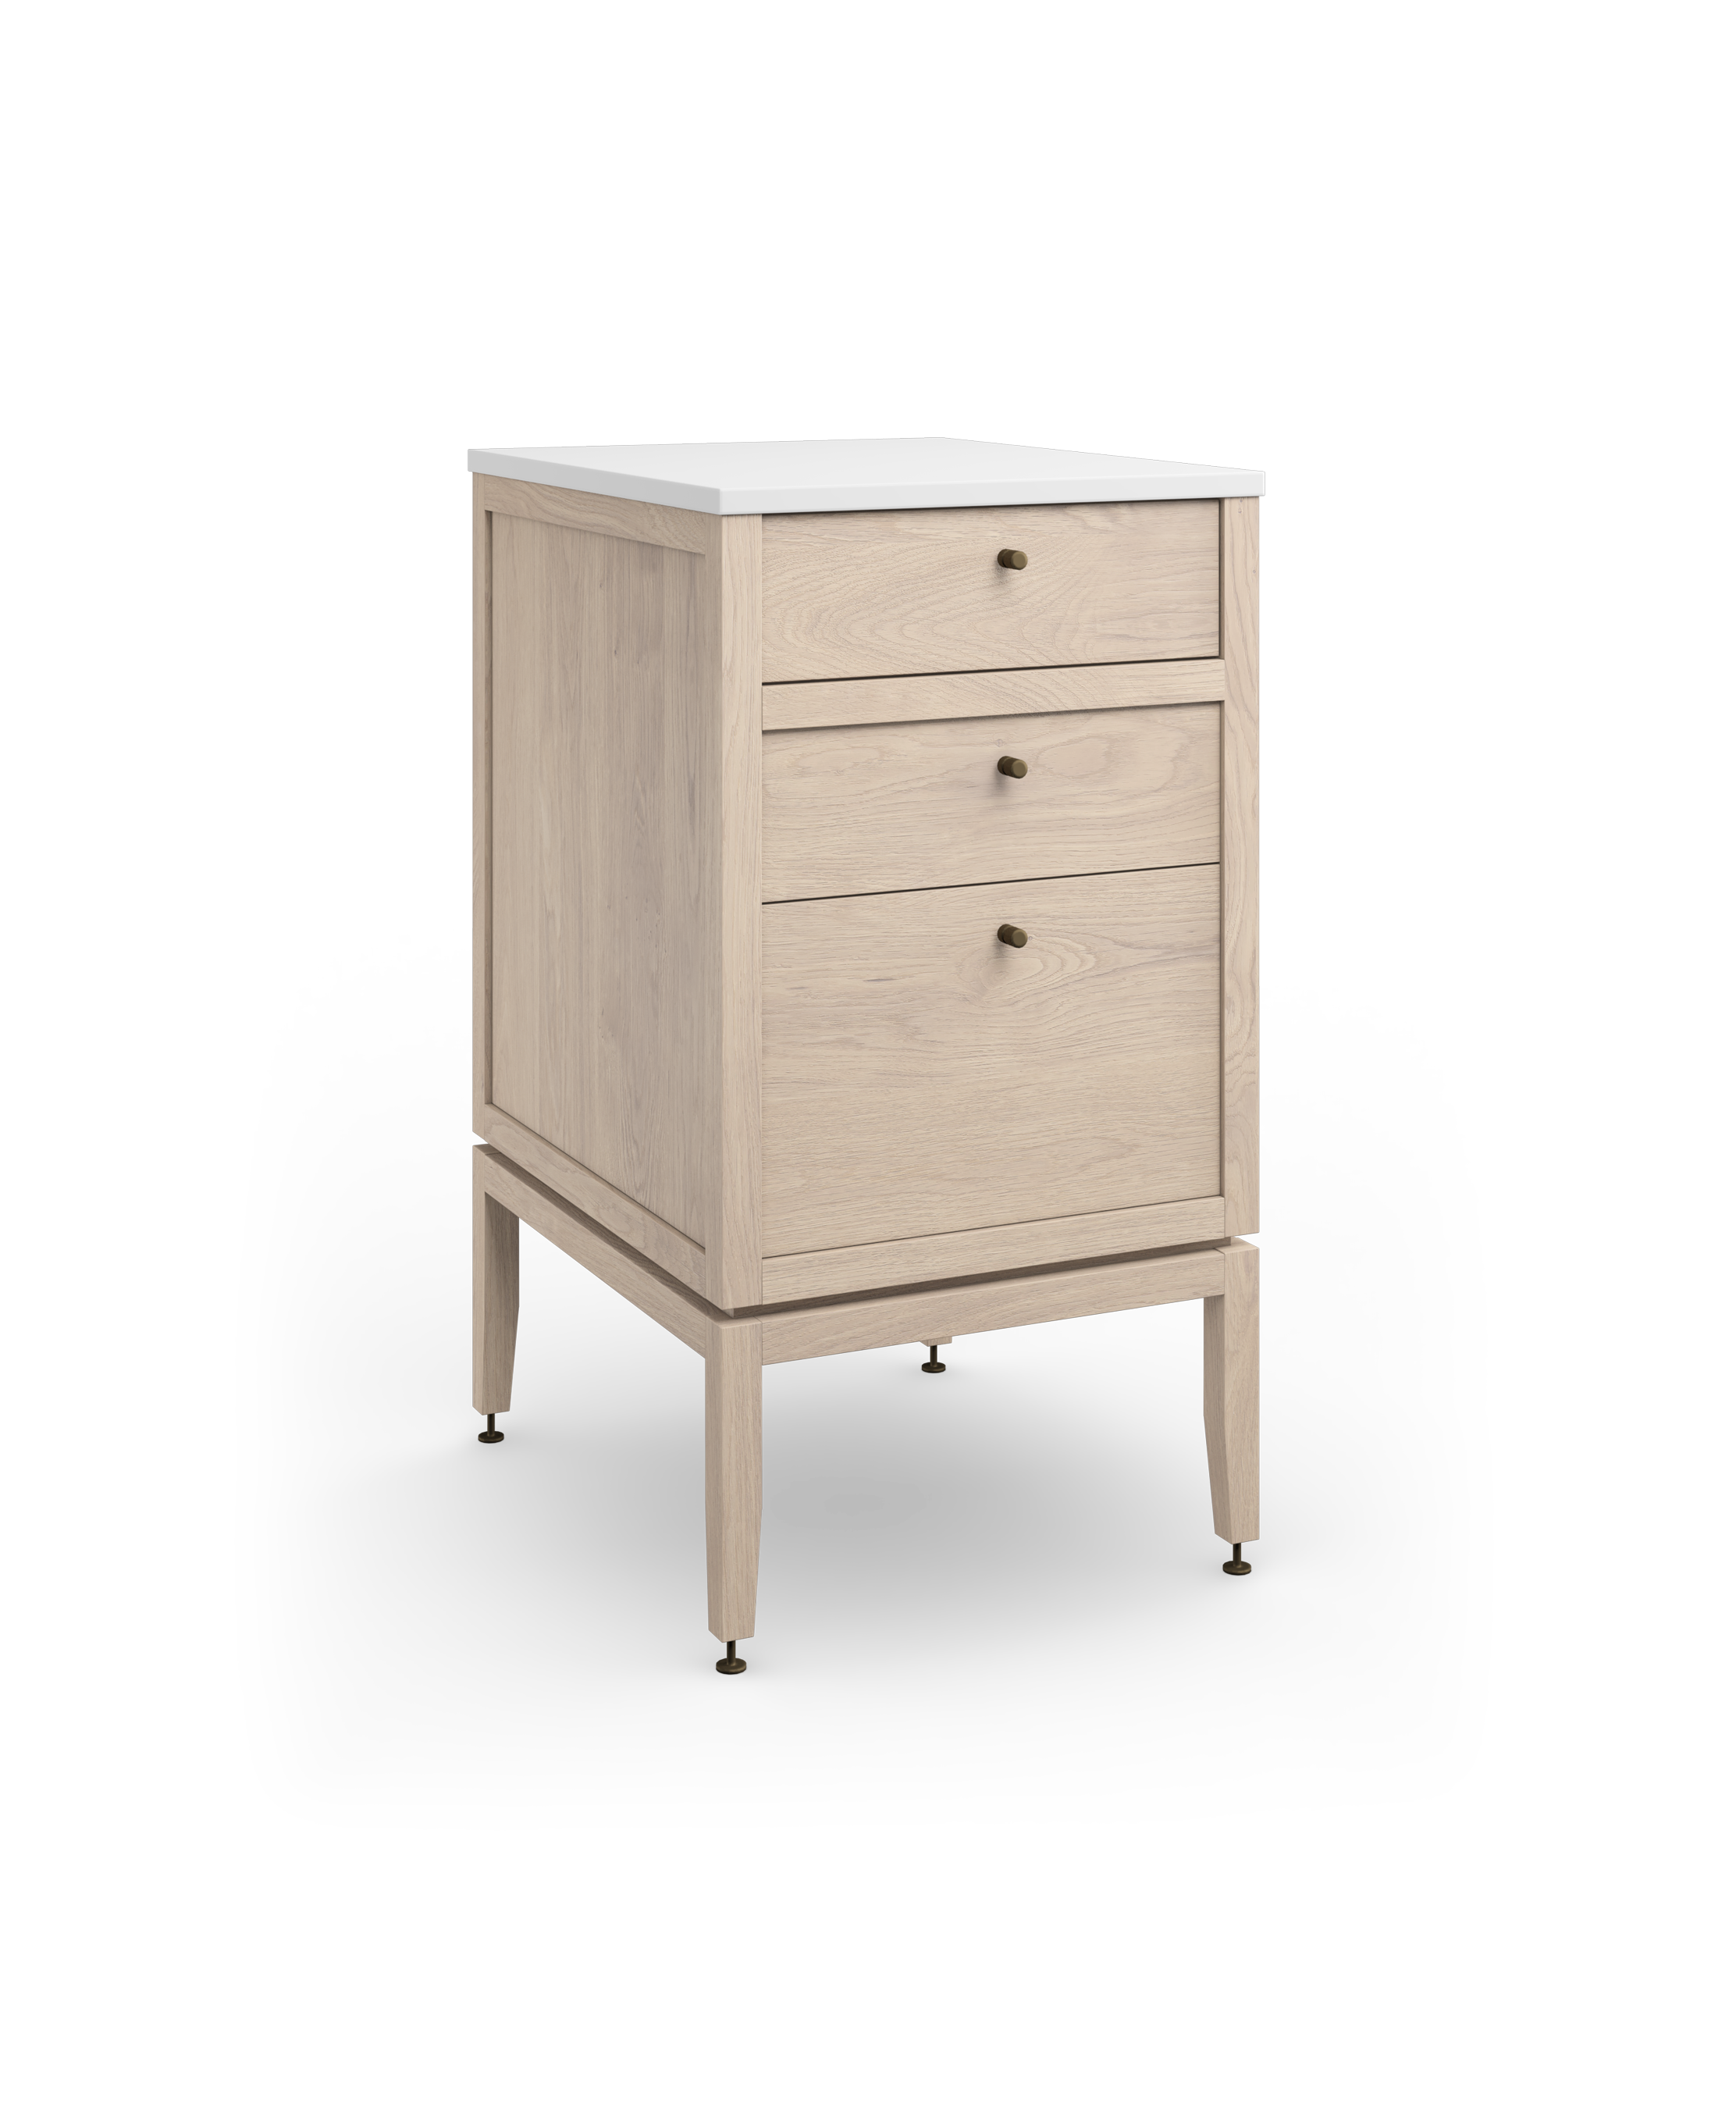 Coquo modular bathroom vanity with three drawers in white stained oak. 